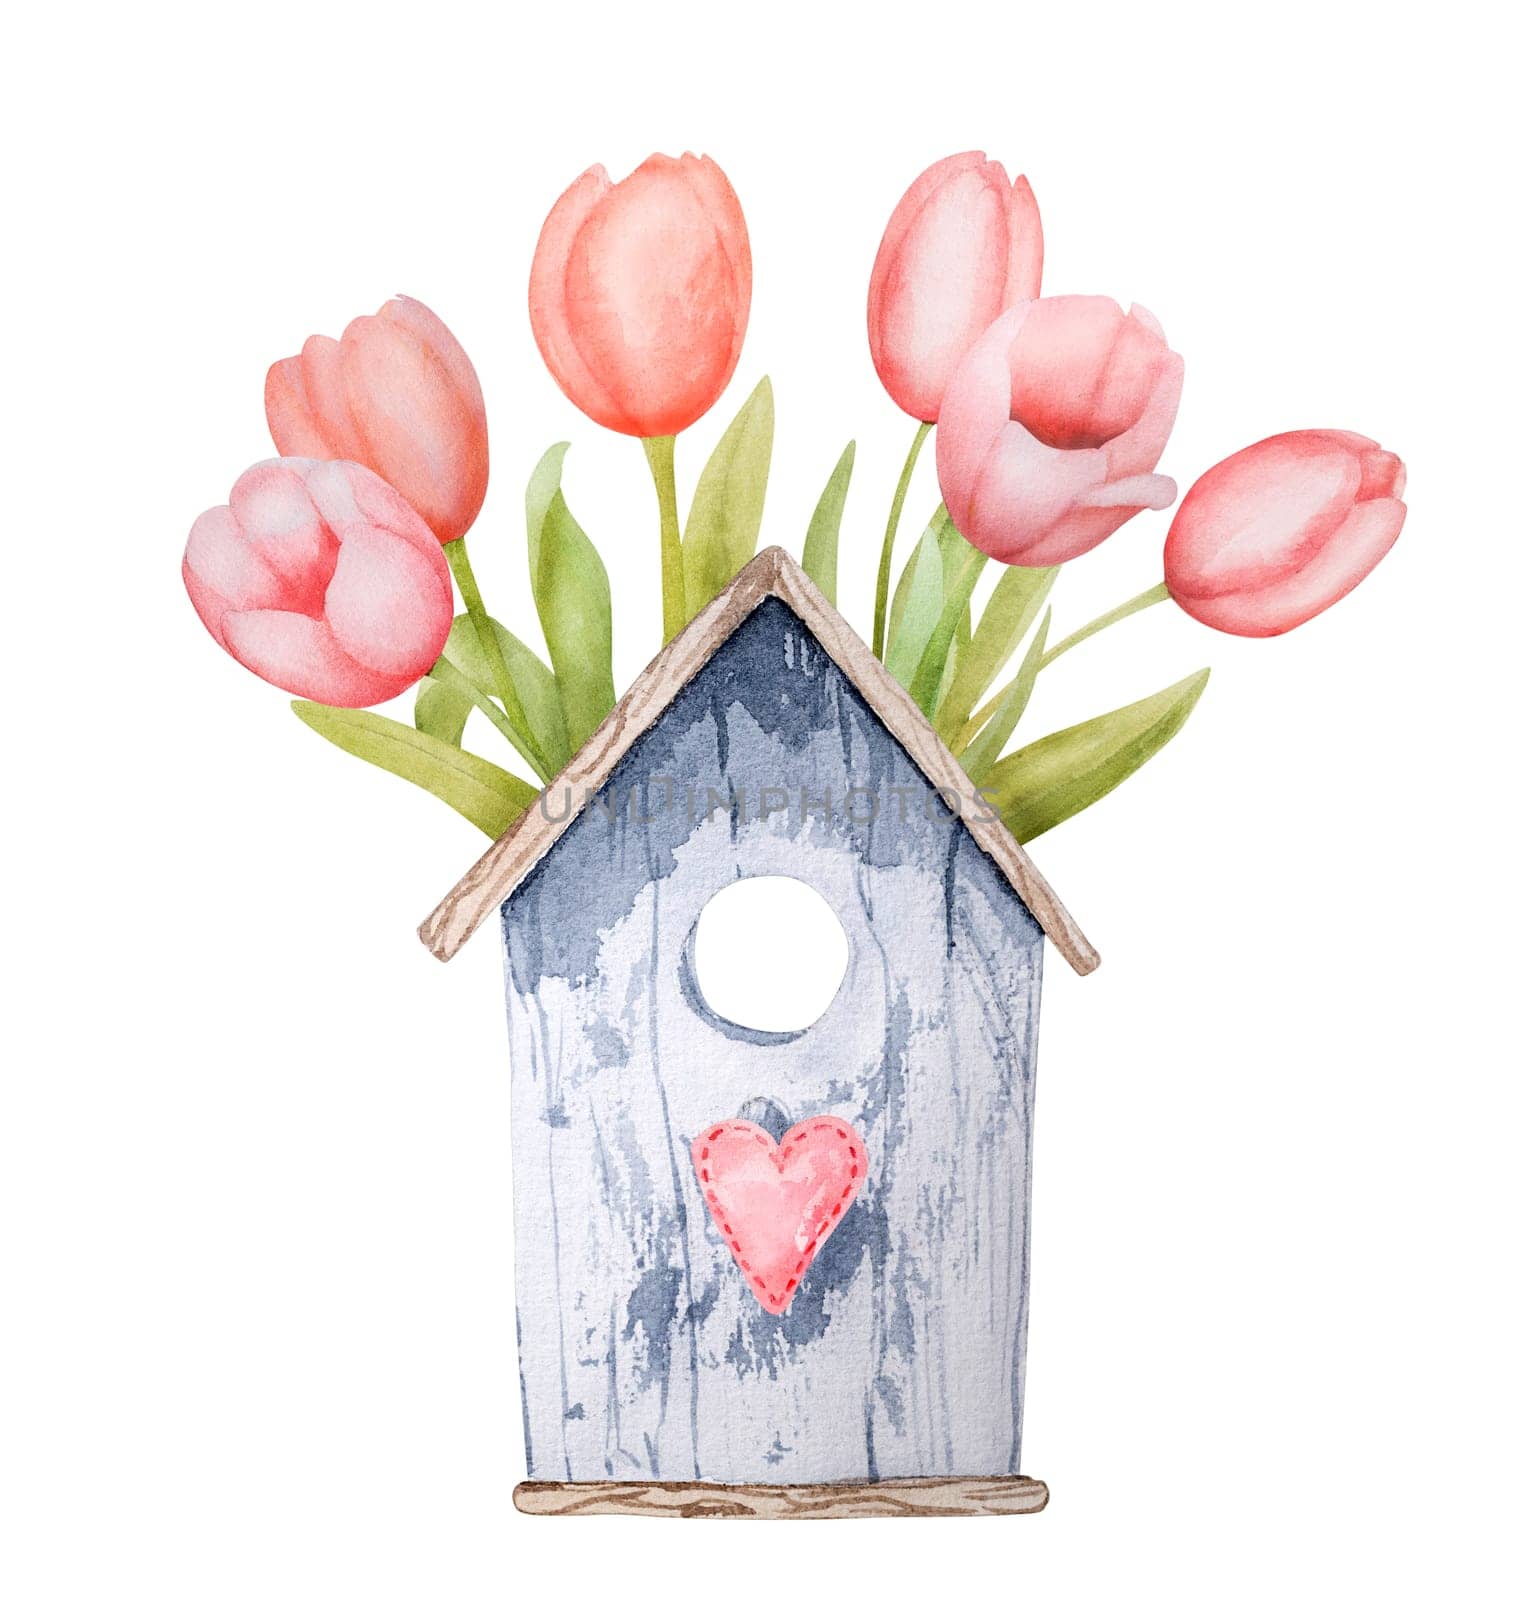 Beautiful pink tulip flowers and wooden bird house watercolor paiting. Spring blossom garden plant aquarelle drawing